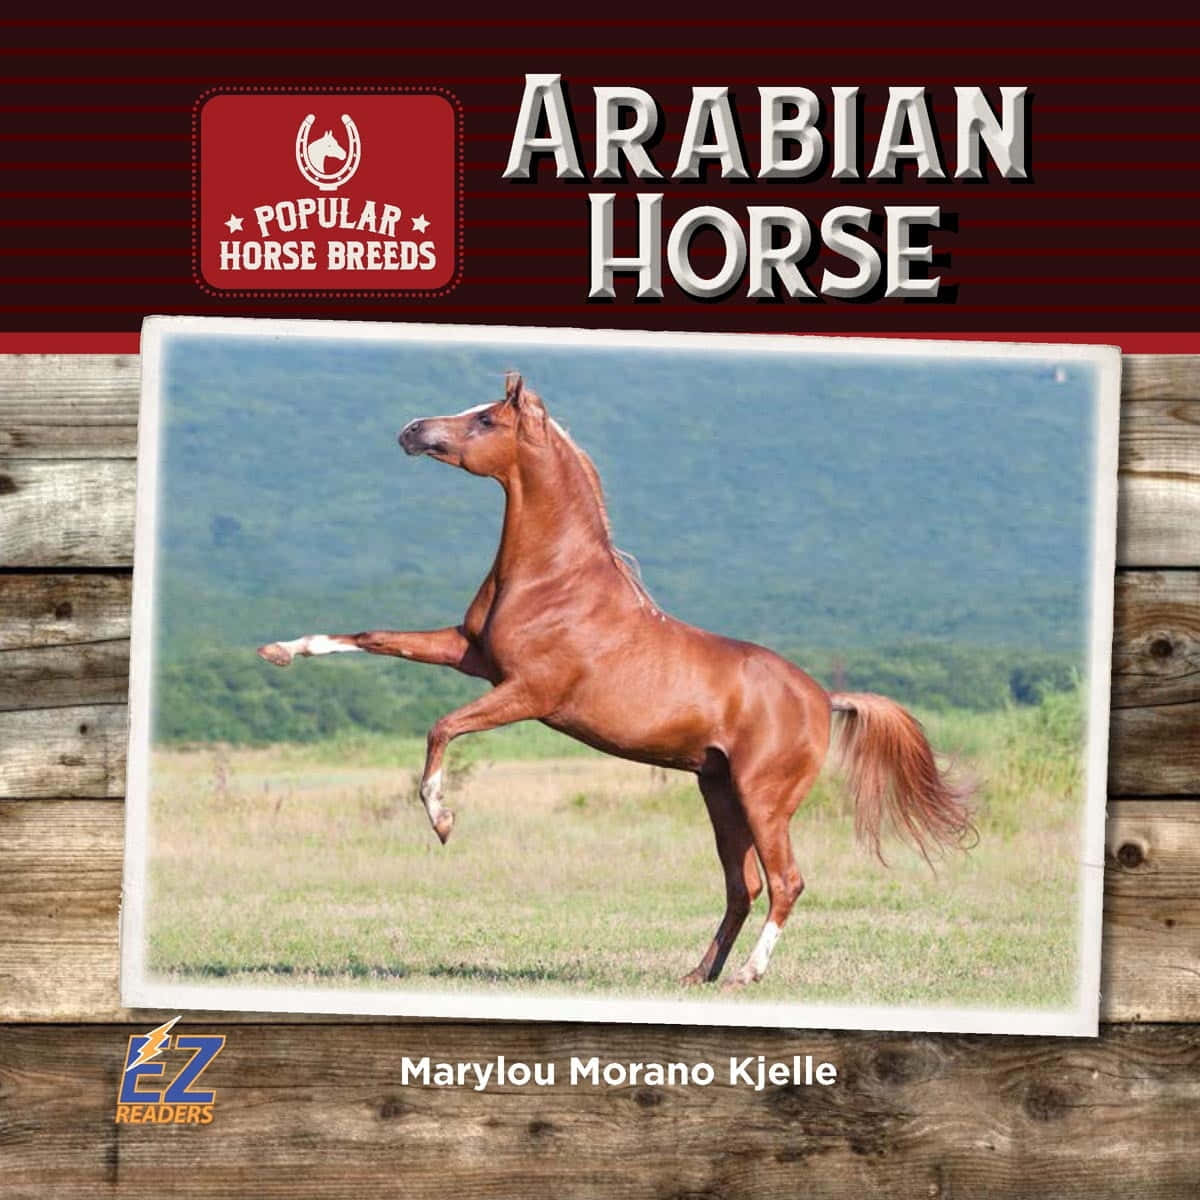 An alluring Arabian Horse with its noble and regal stature